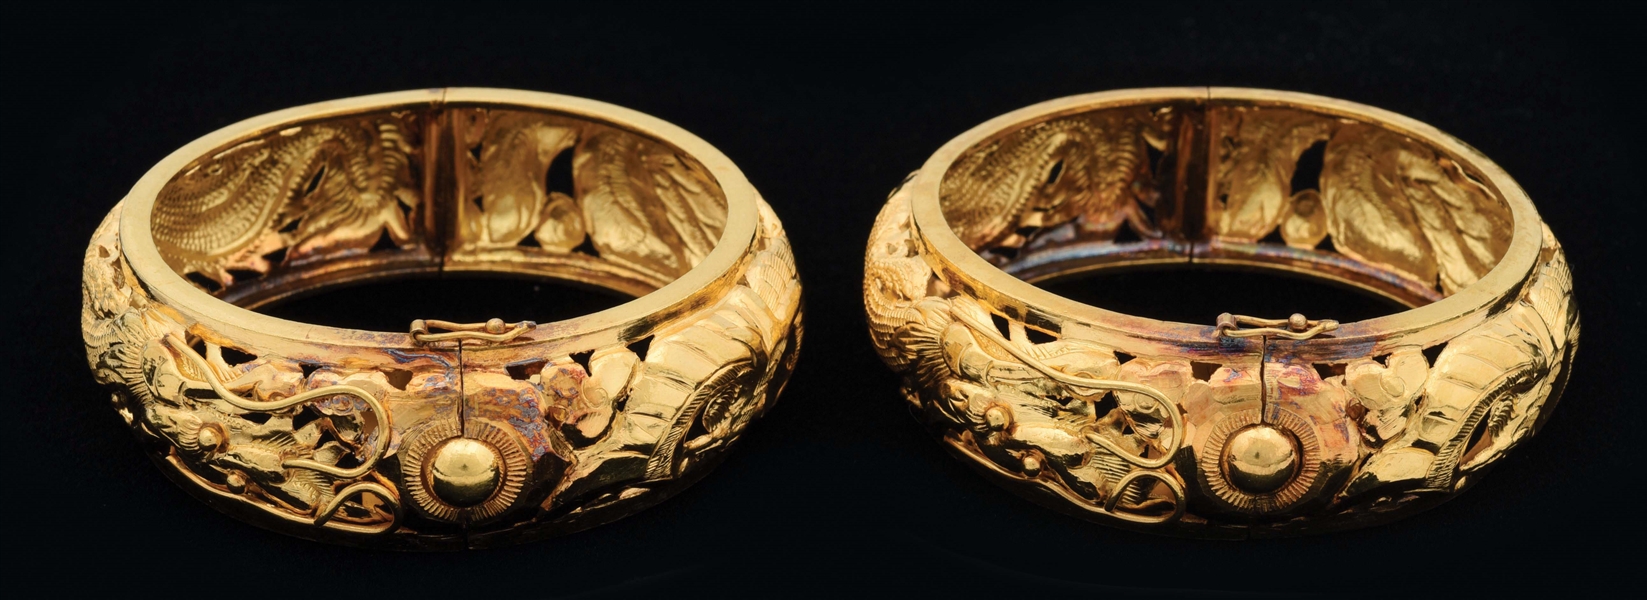 PAIR OF MATCHING WIDE YELLOW GOLD CHINESE BANGLE BRACELETS.